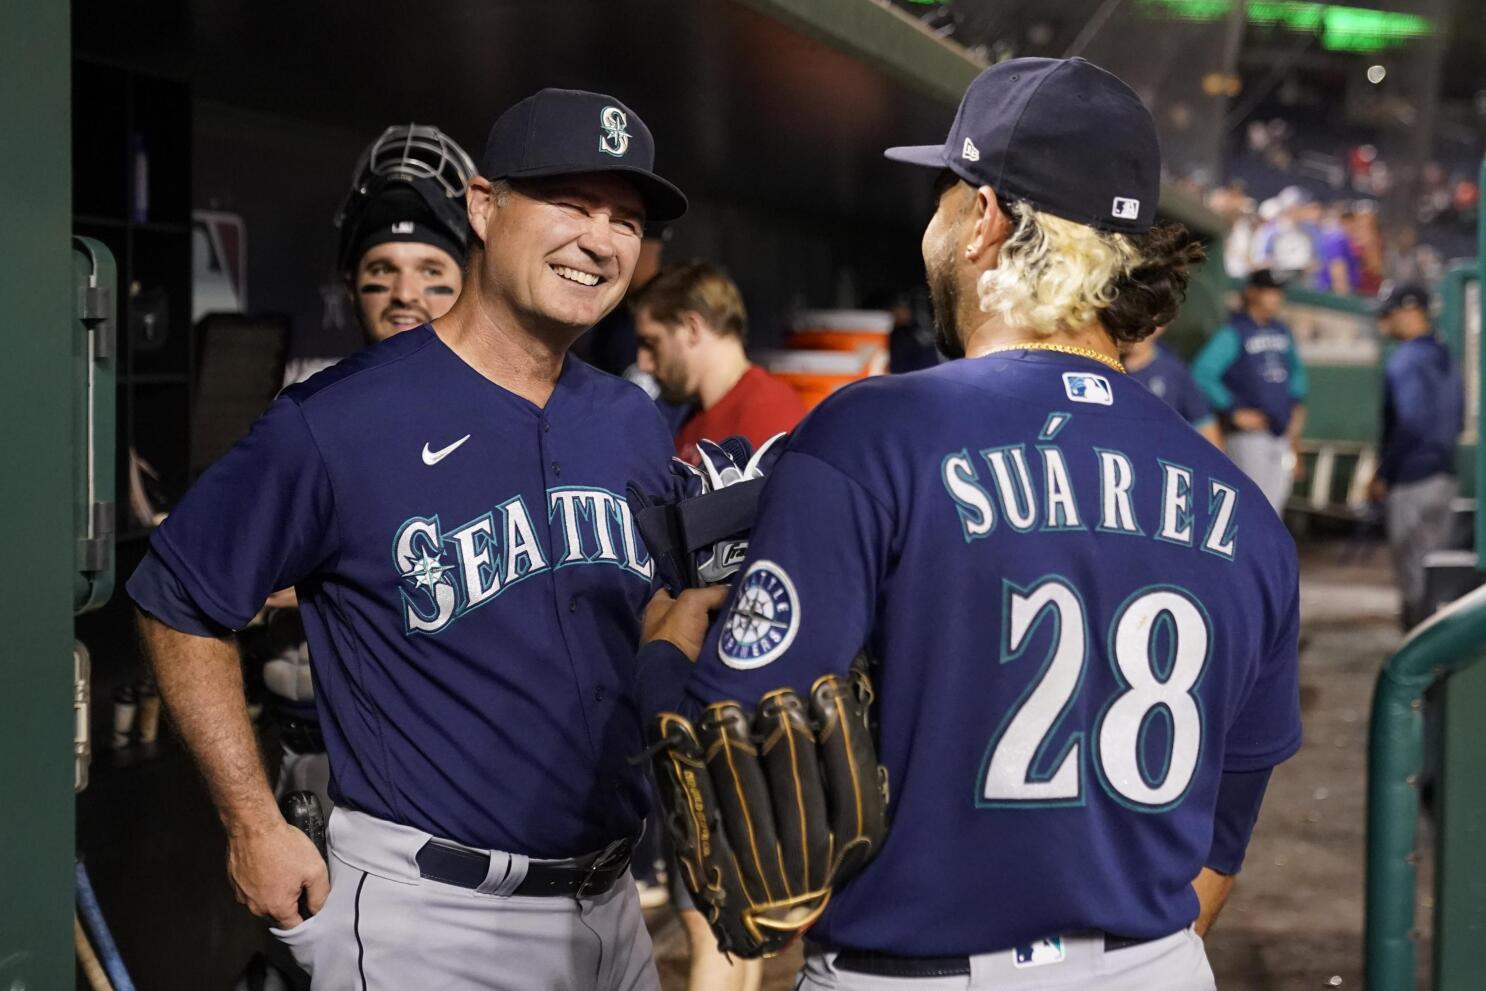 Seattle Mariners fall to Cleveland Guardians in 9-4 loss